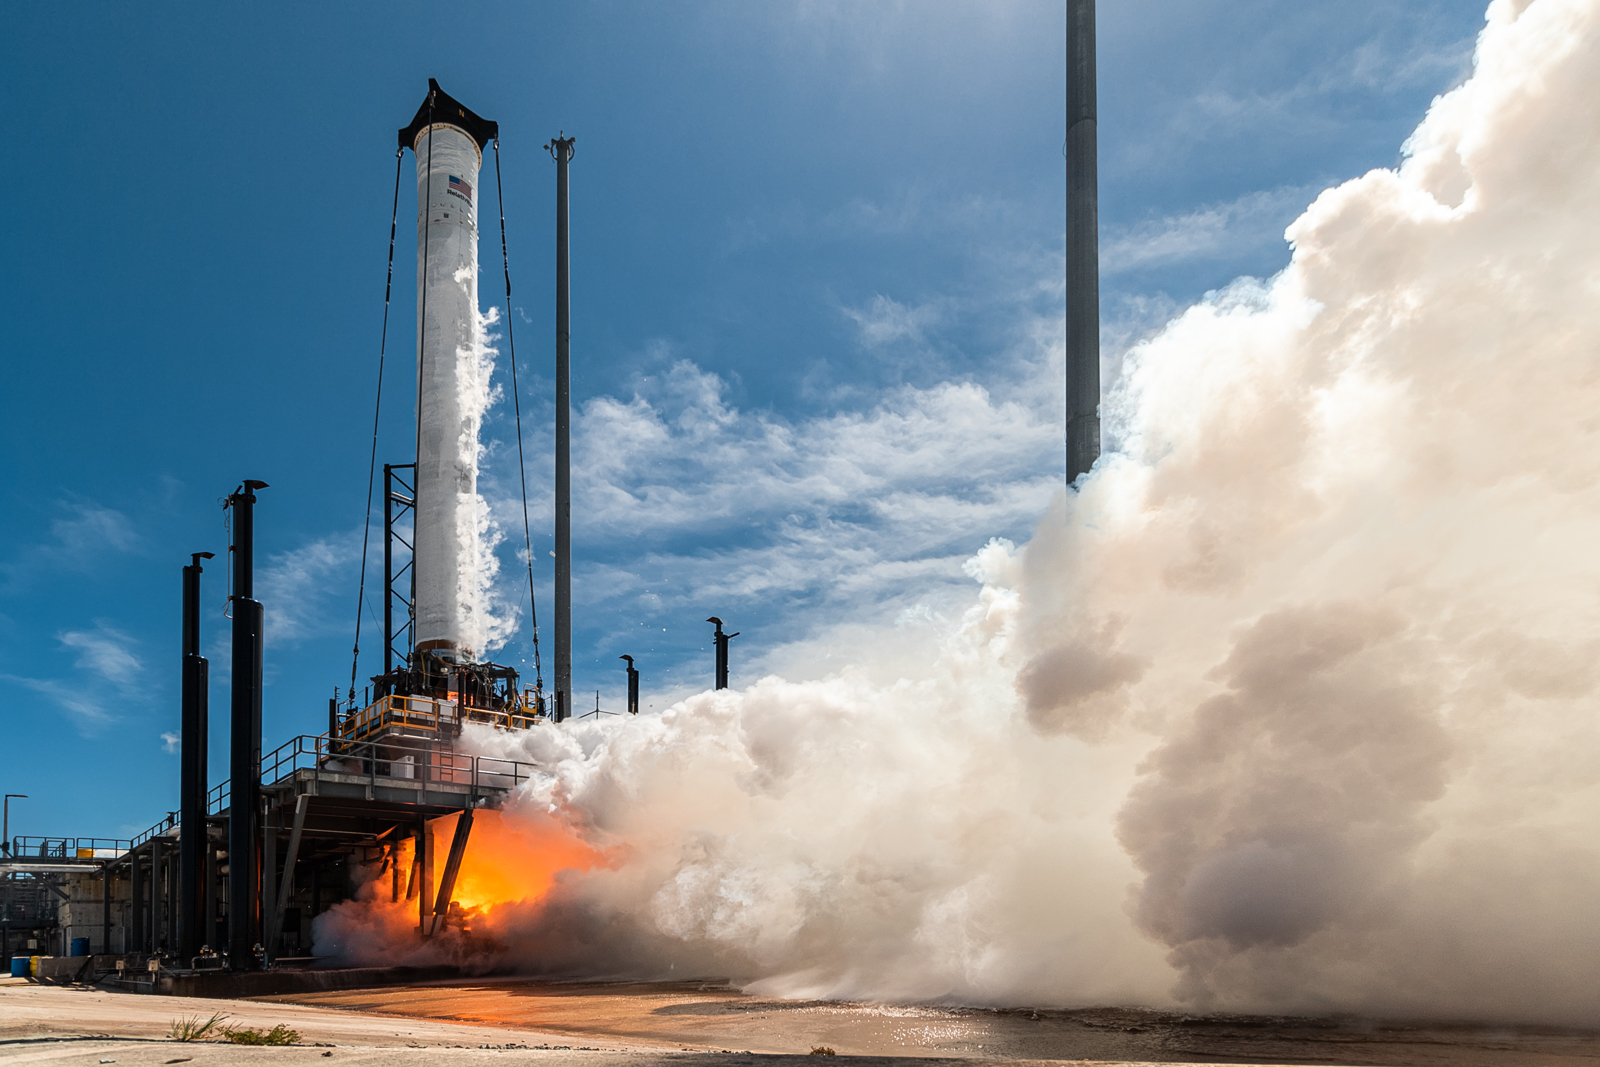 Stage one of Relativity Space's Terran 1 rocket undergoes testing at Launch Complex-16 in Florida.